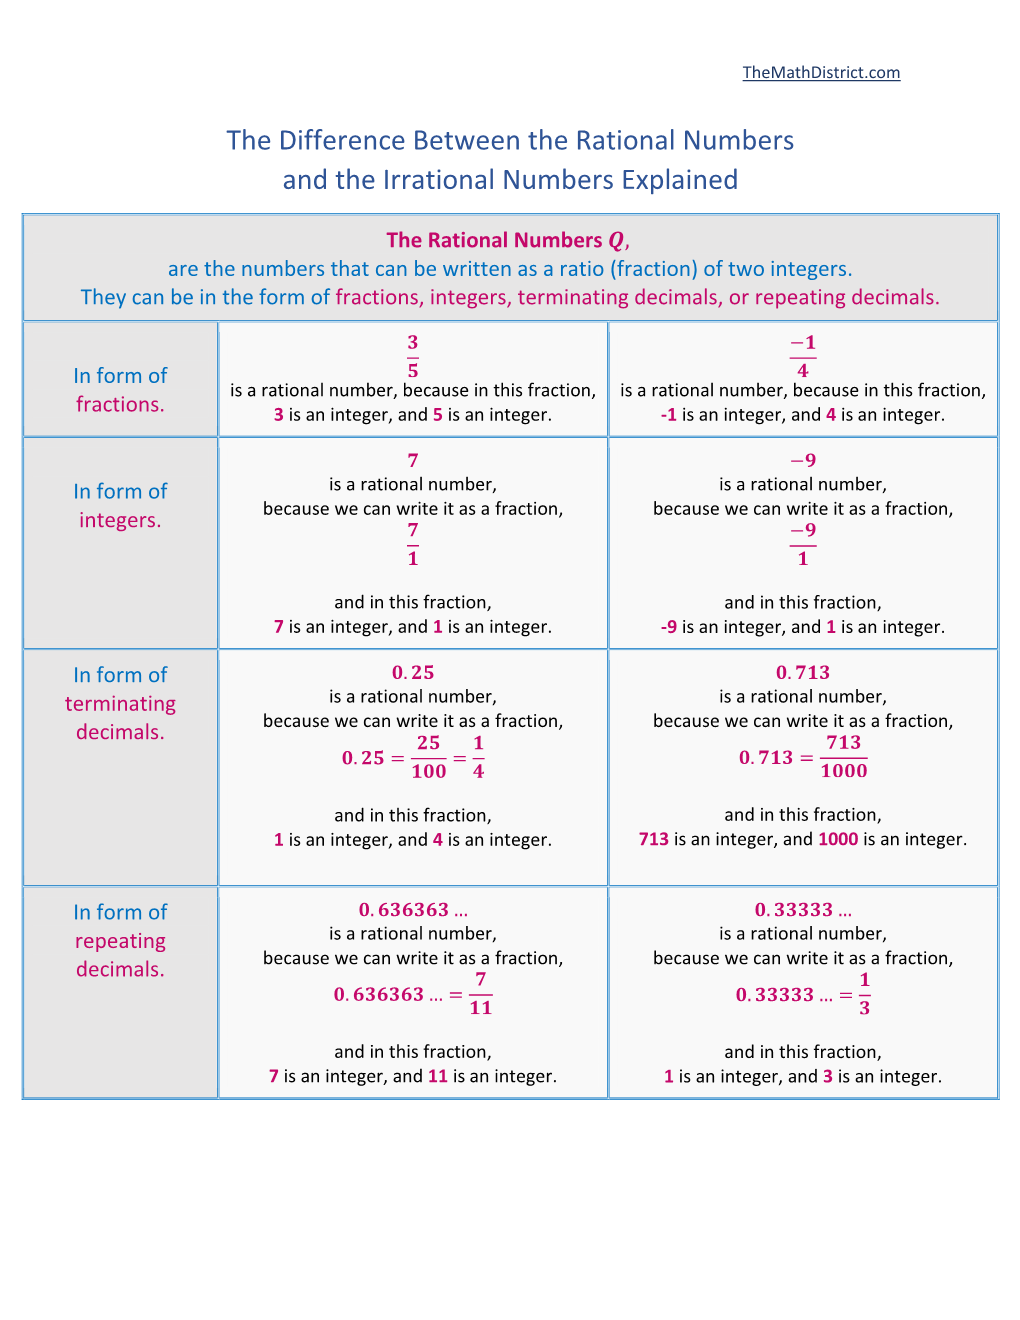 The Difference Between The Rational Numbers And The Irrational Numbers